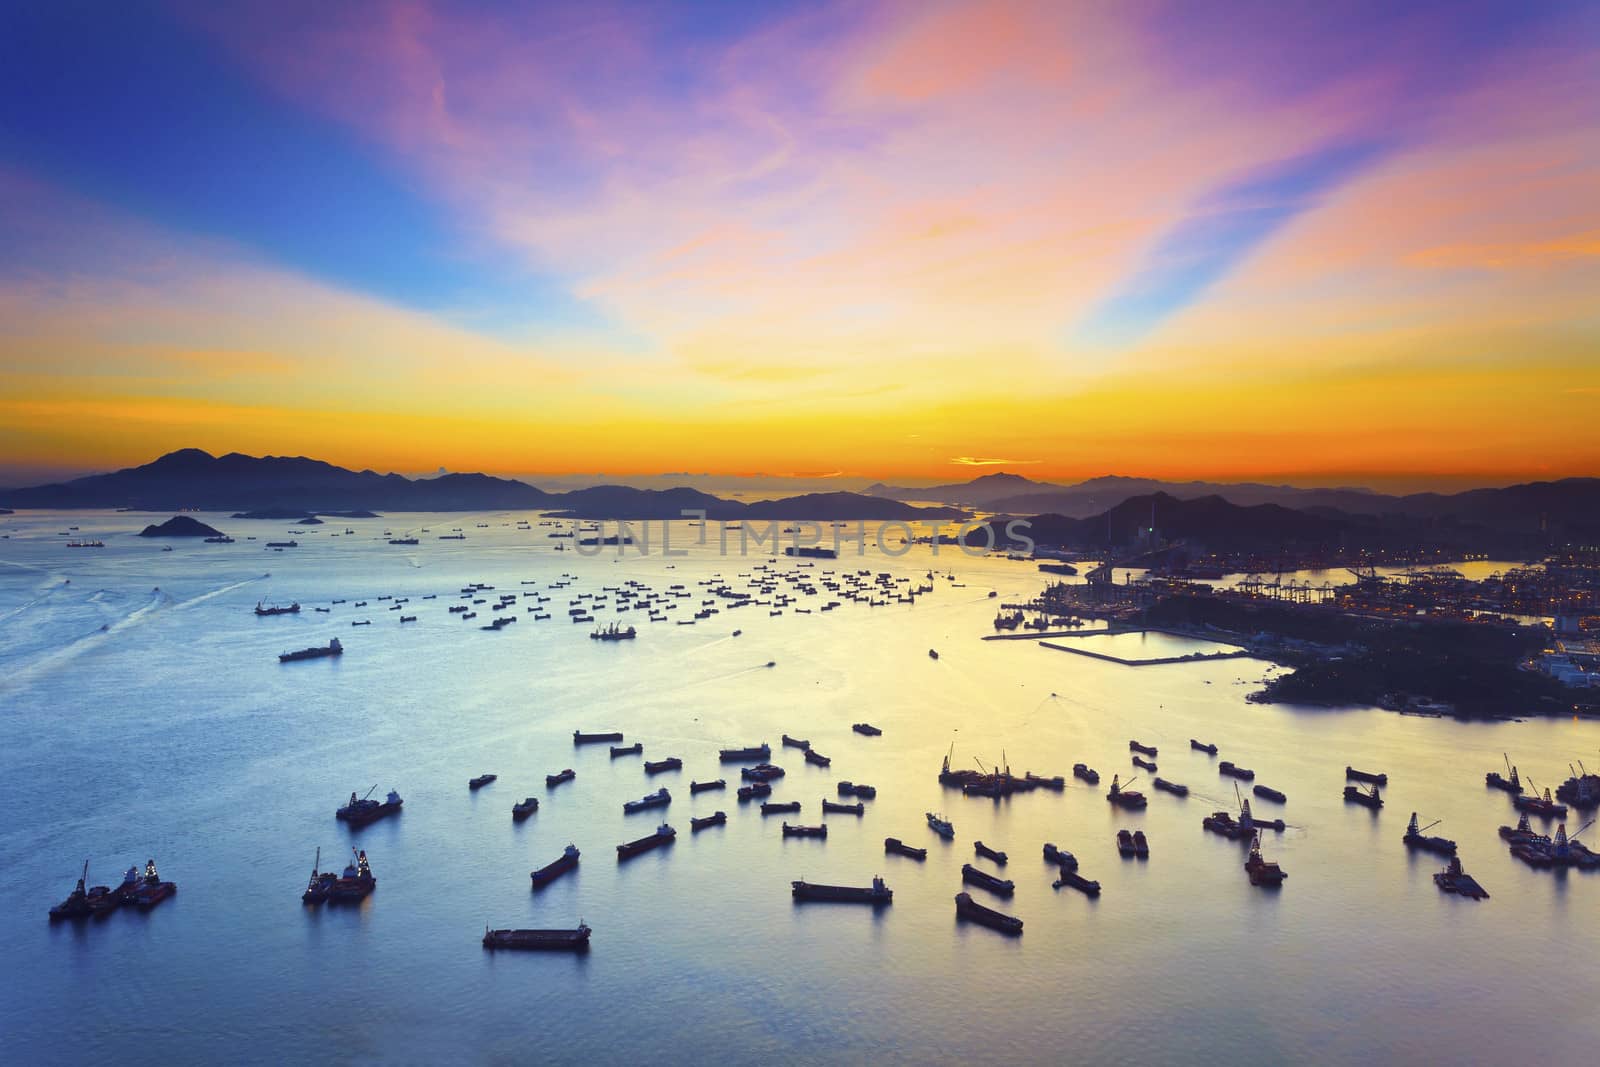 Sunset over the sea in Hong Kong by kawing921